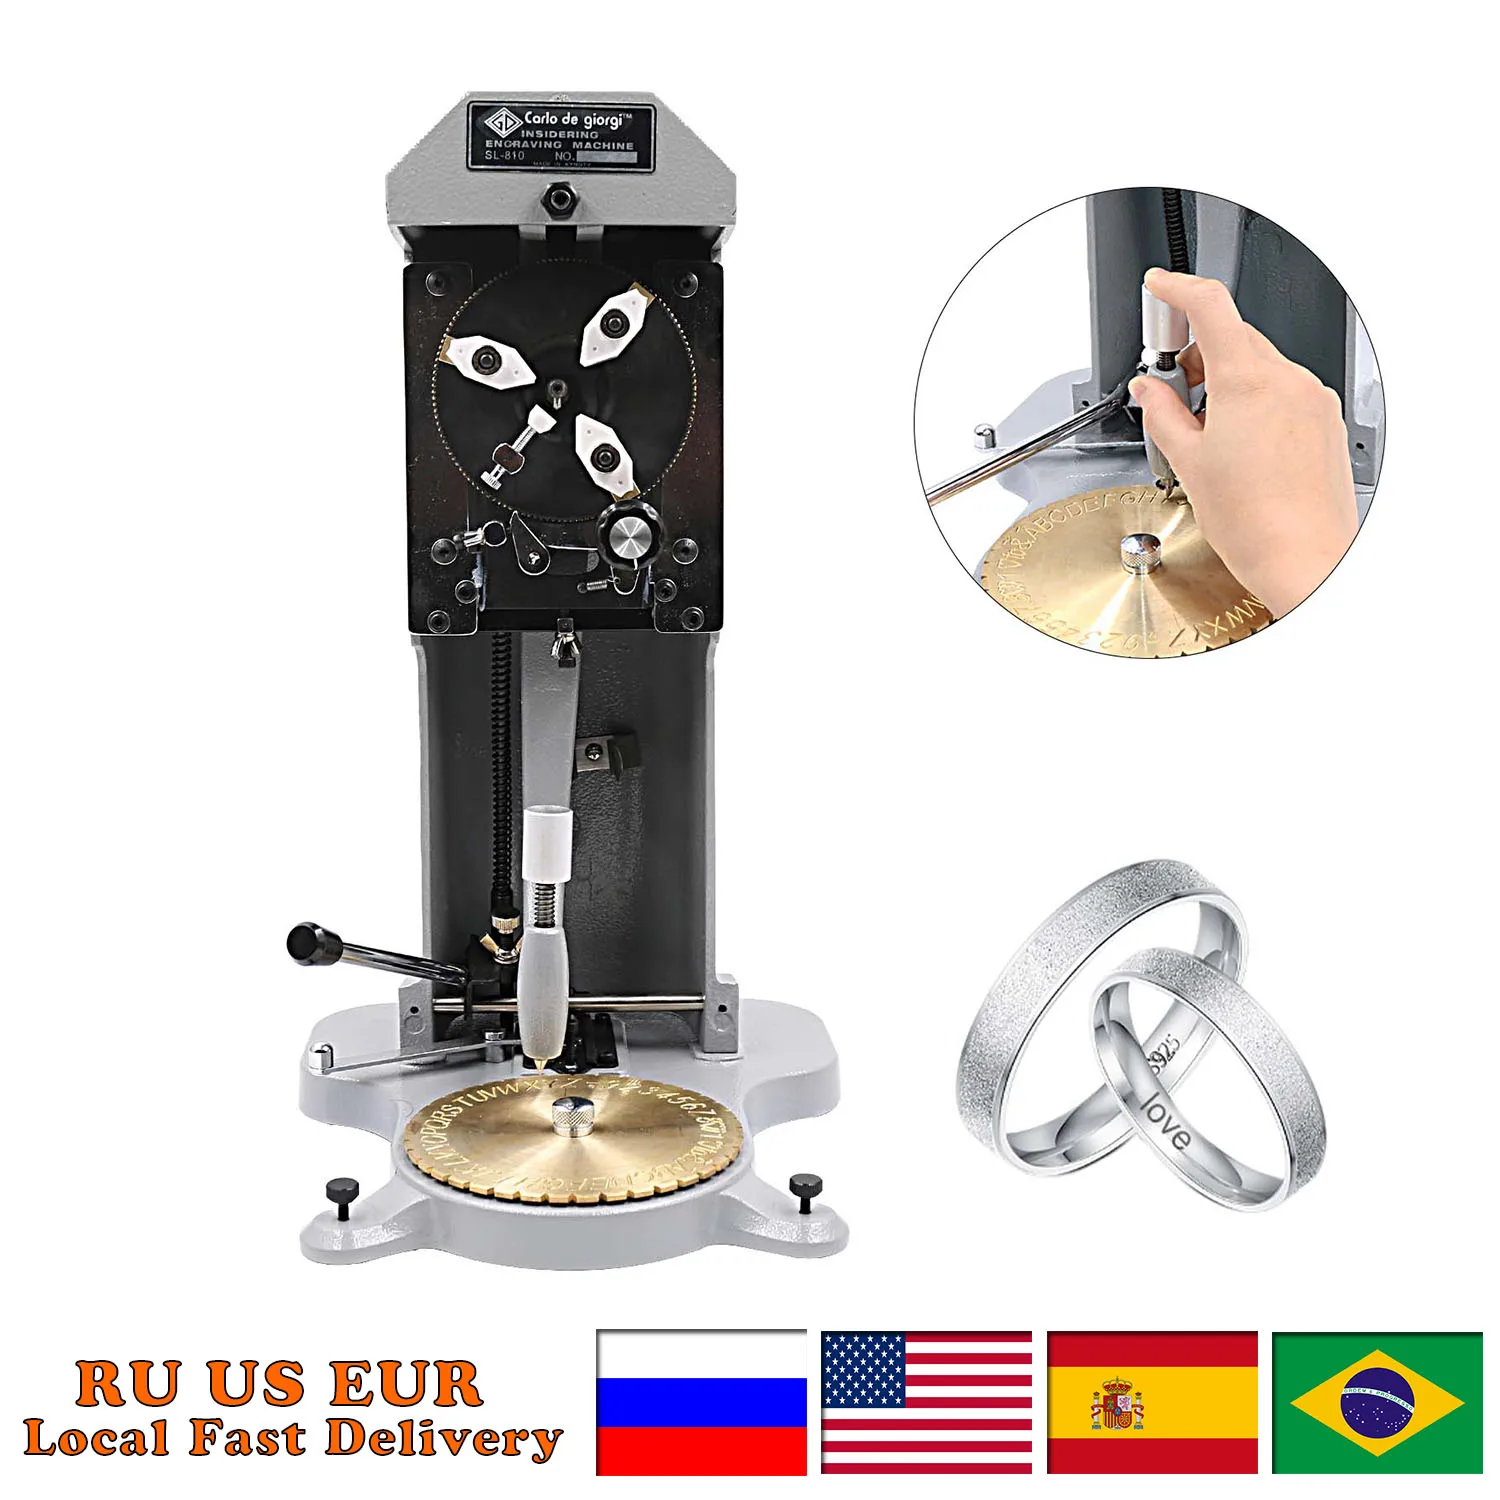 Ring Engraver for Inner Engraving Inside with Letter Block Dial Ring Engraving Machine for Jewelry Inner Engraving Making Tools 4x6mm price tags price display cubes adjustable number counter stand block for jewelry watch ring dollar pricing show kit